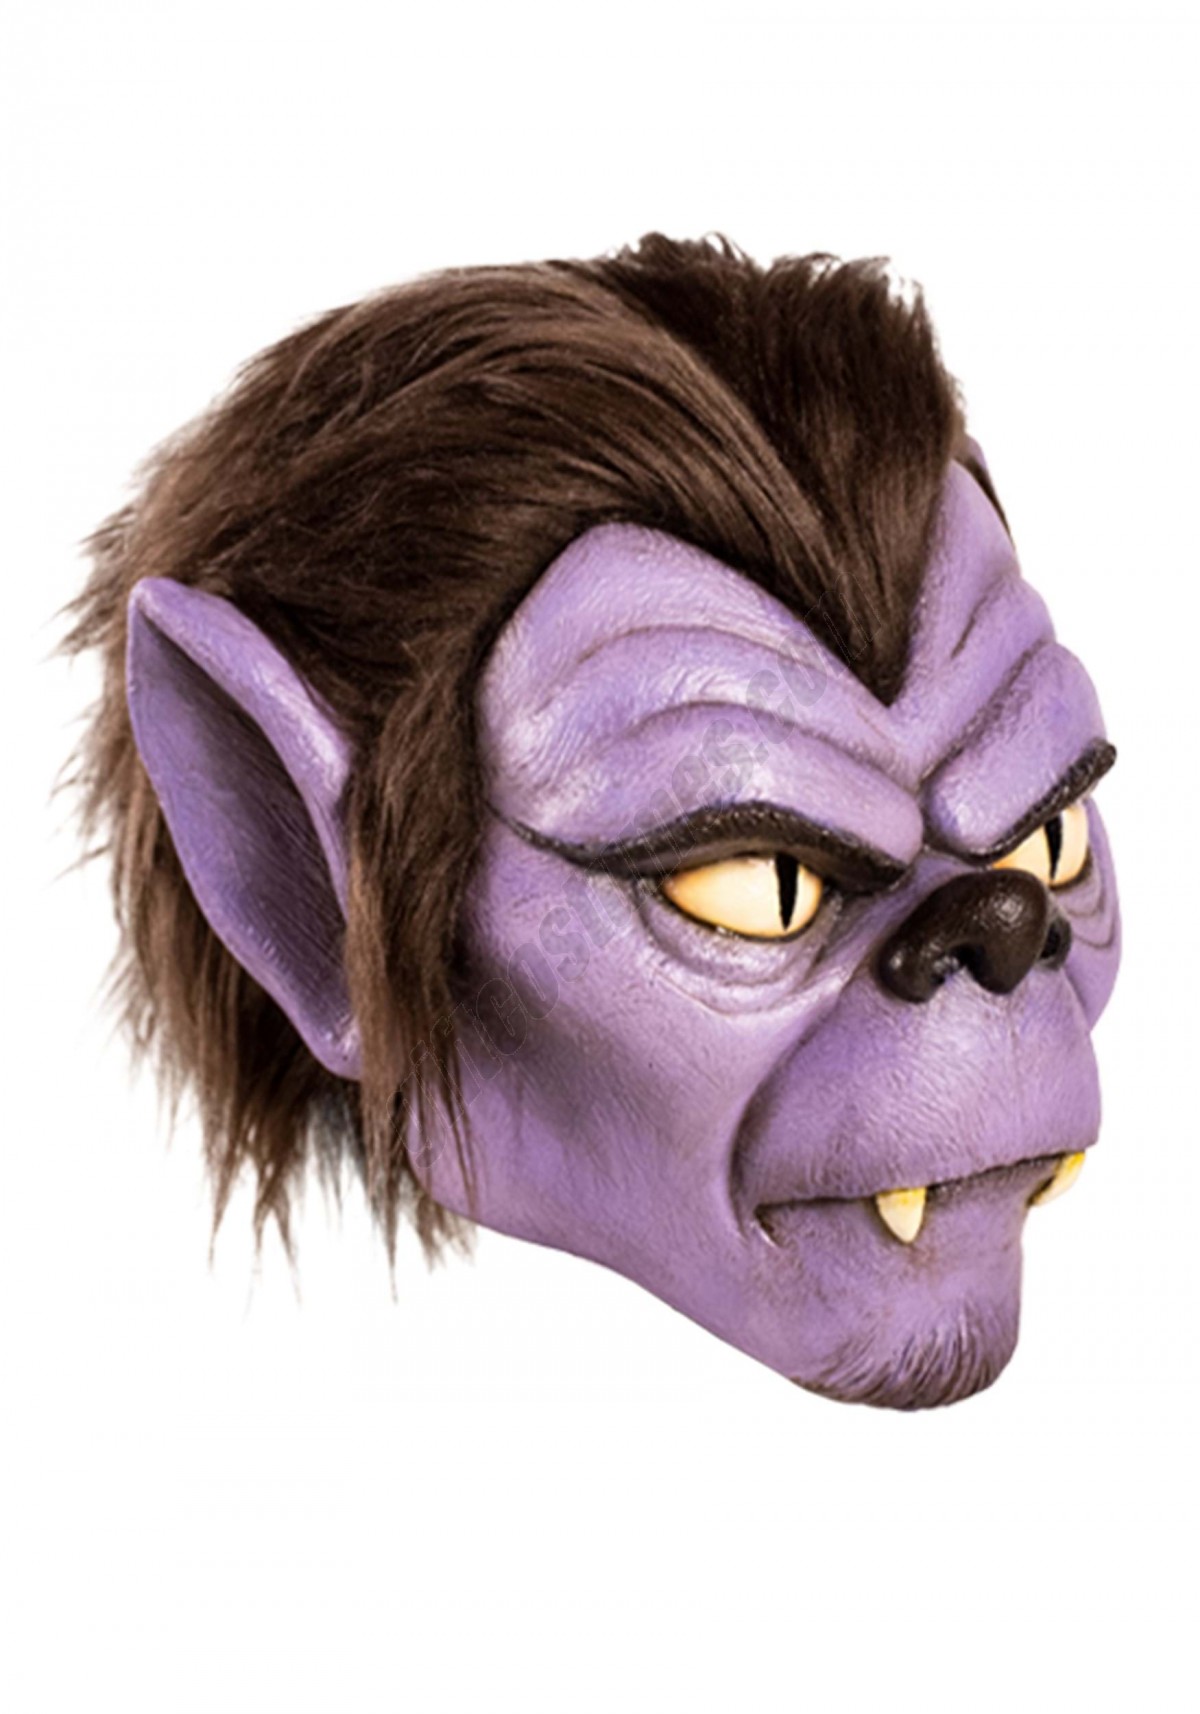 Wolfman Mask from Scooby Doo  Promotions - -2